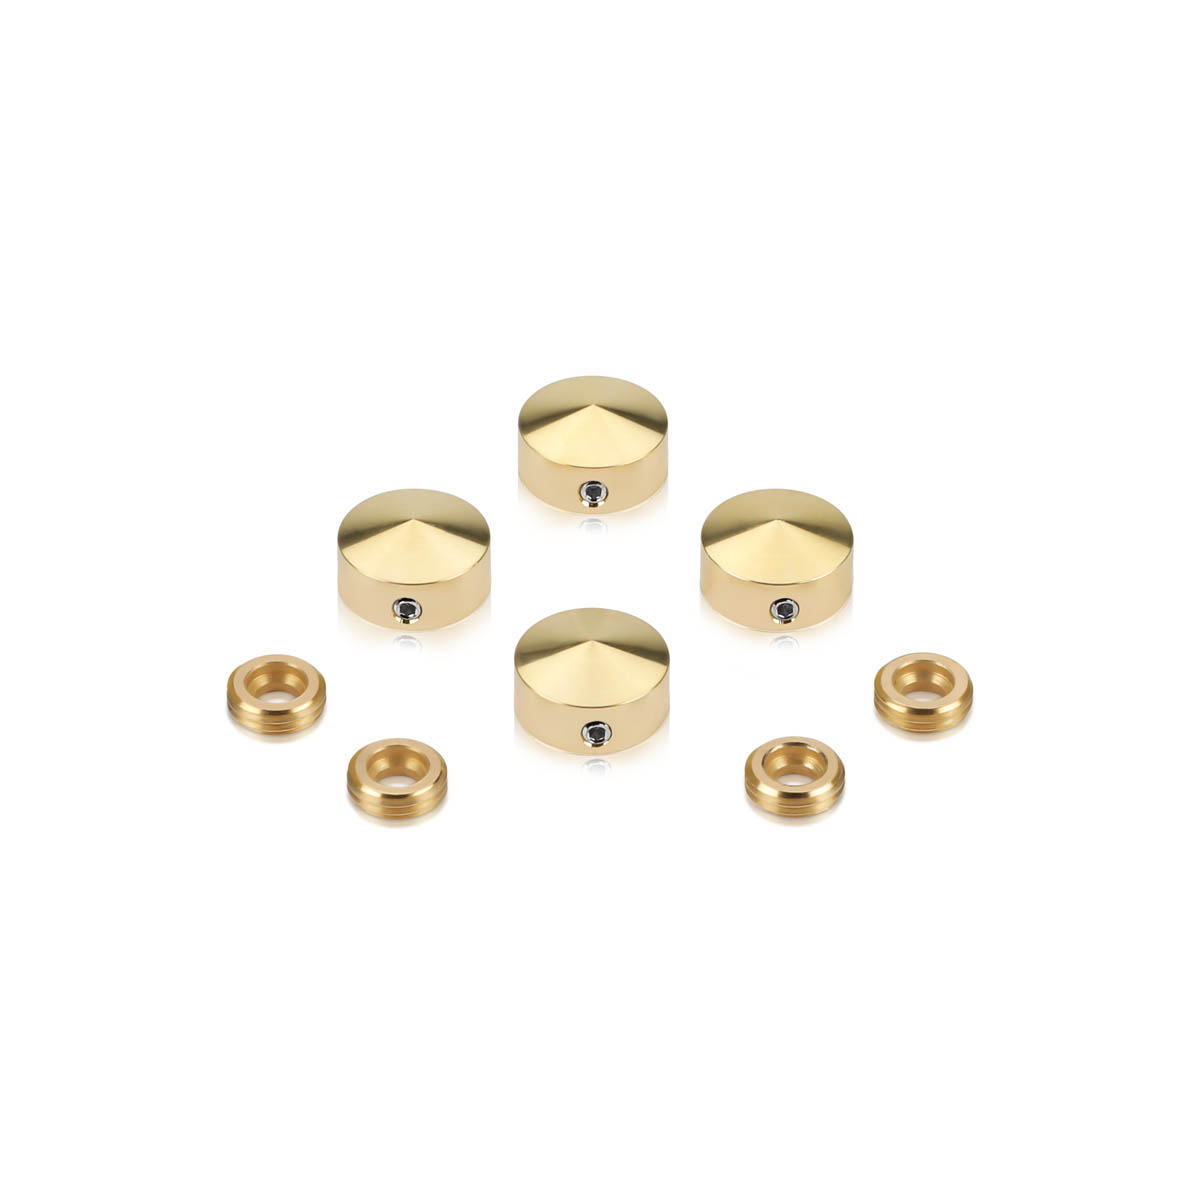 Set of 4 Conical Locking Screw Cover, Diameter: 5/8'' Brass Plain Finish (Indoor or Outdoor Use, but for outdoor use Brass will come darker if no varnish applied)